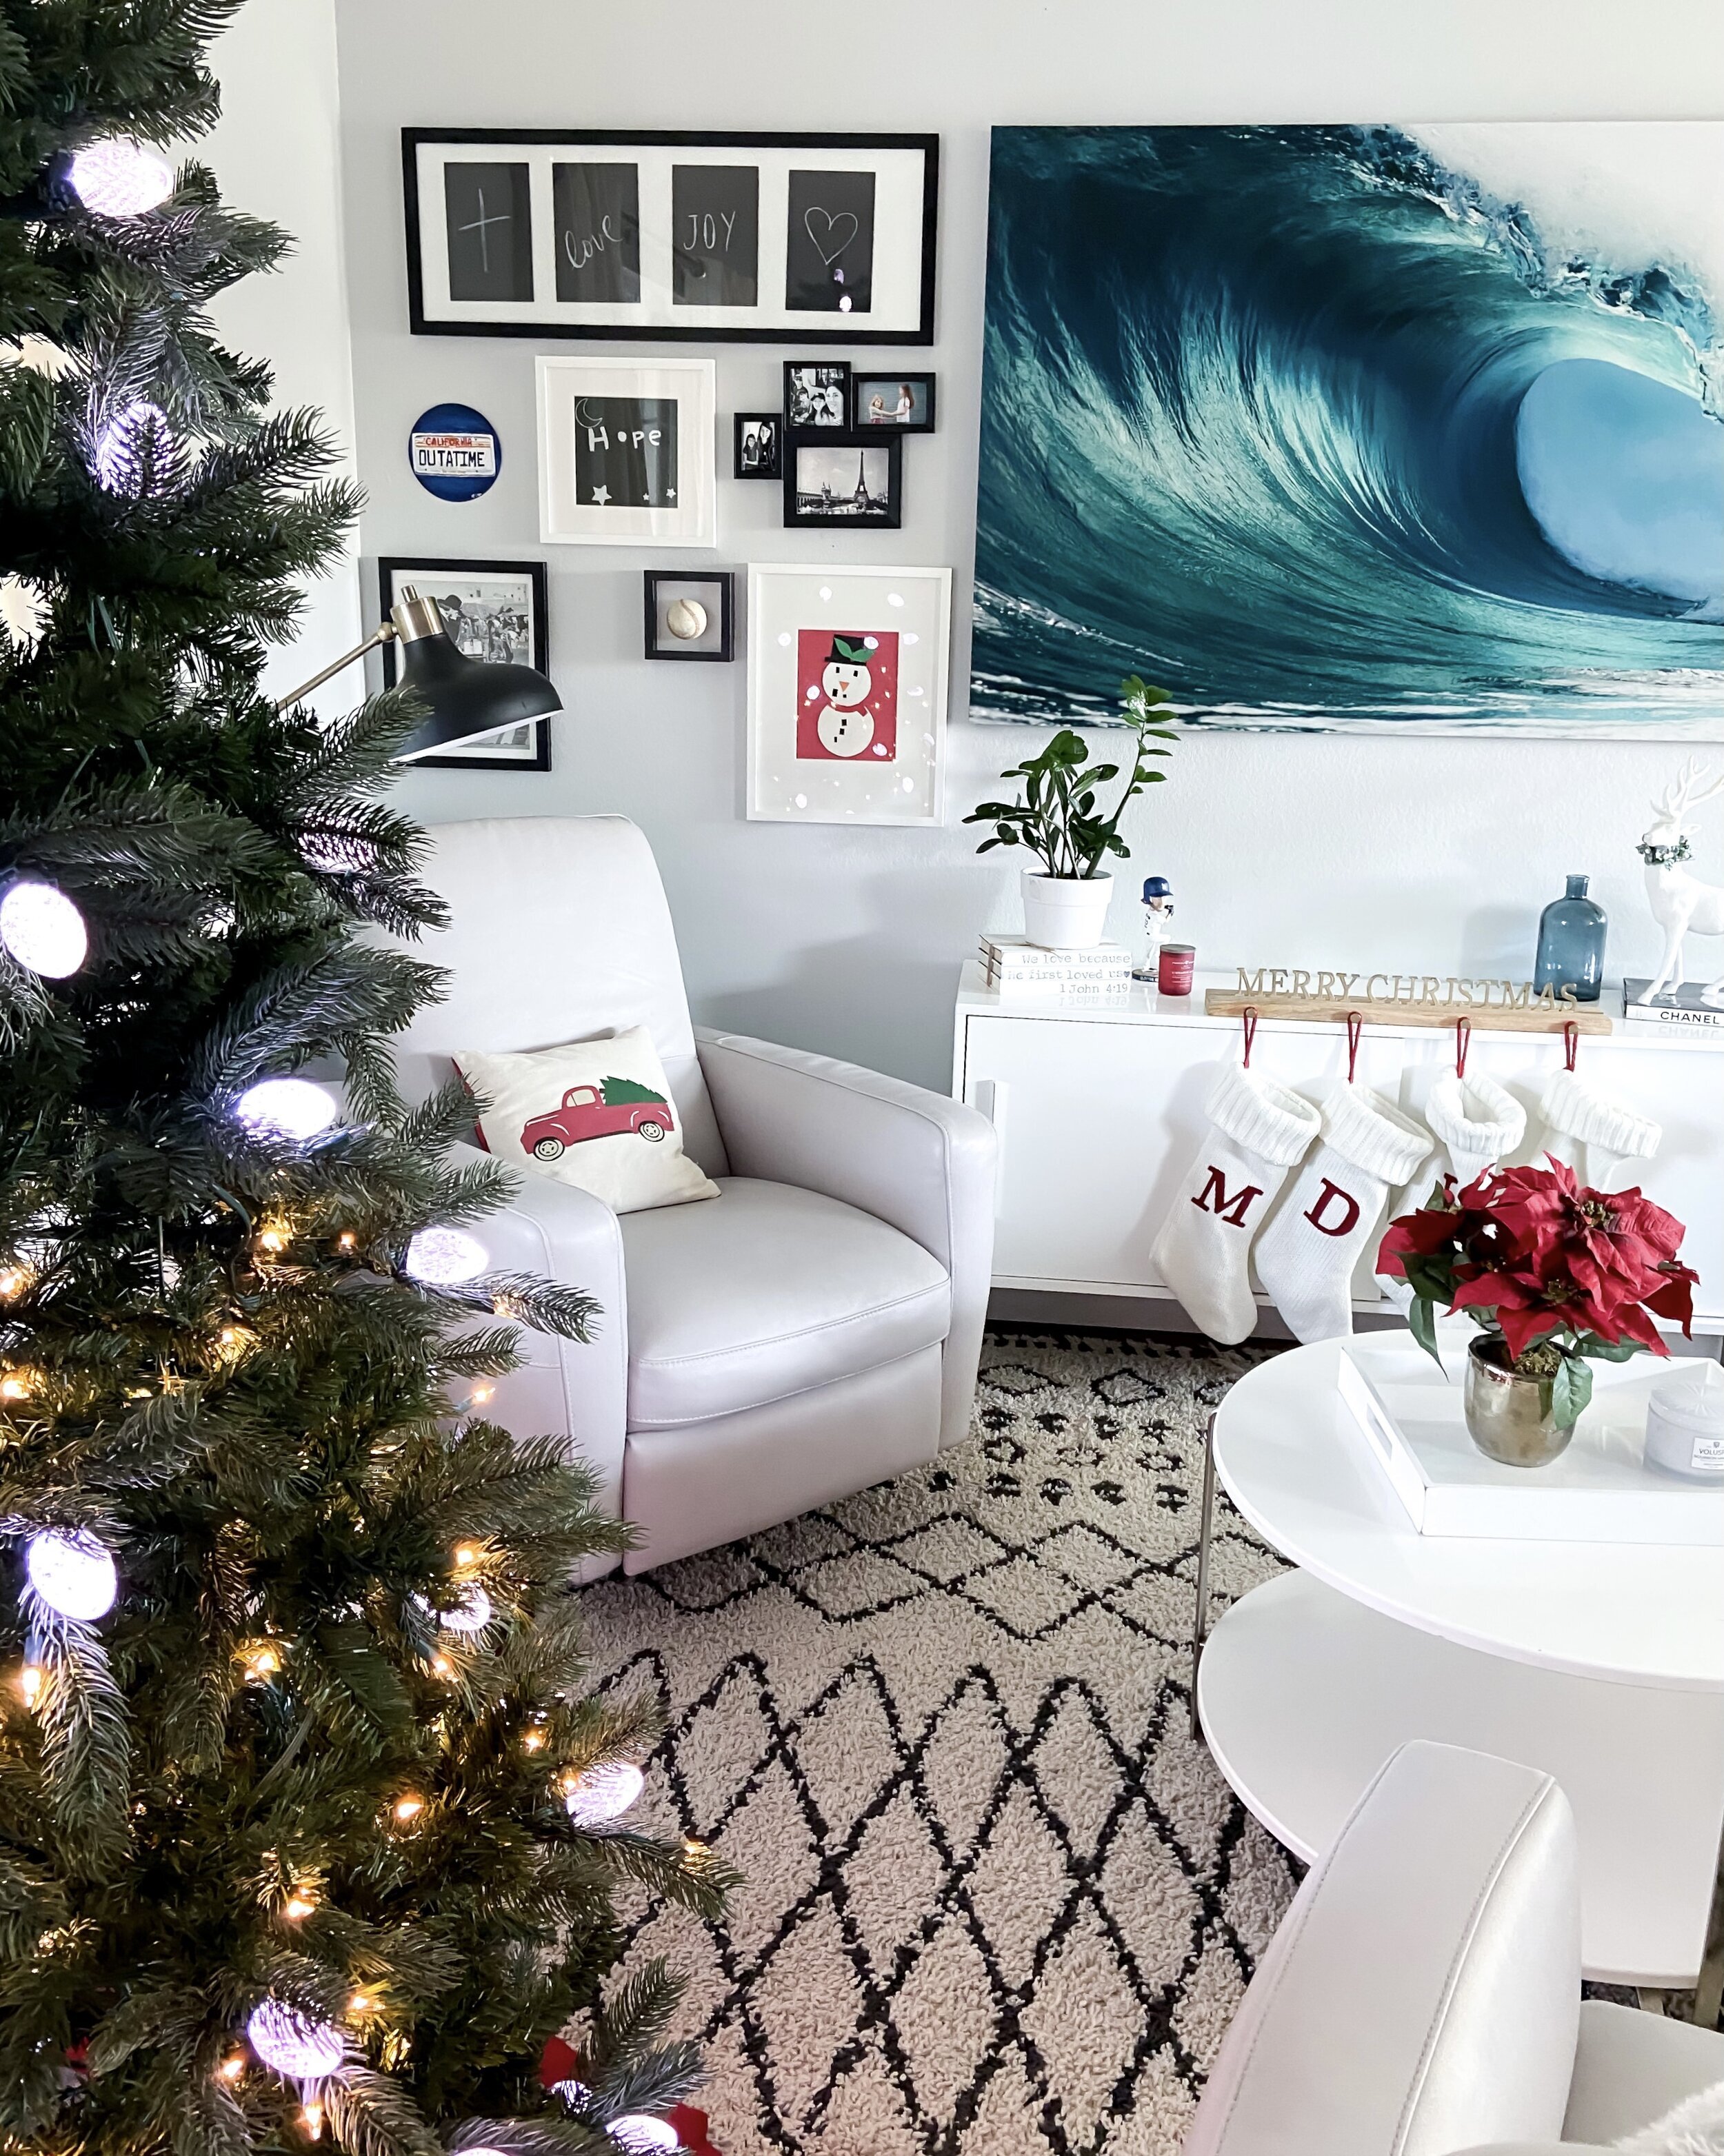 Decorating For Christmas 2020 + The Little Things — Libier Reynolds